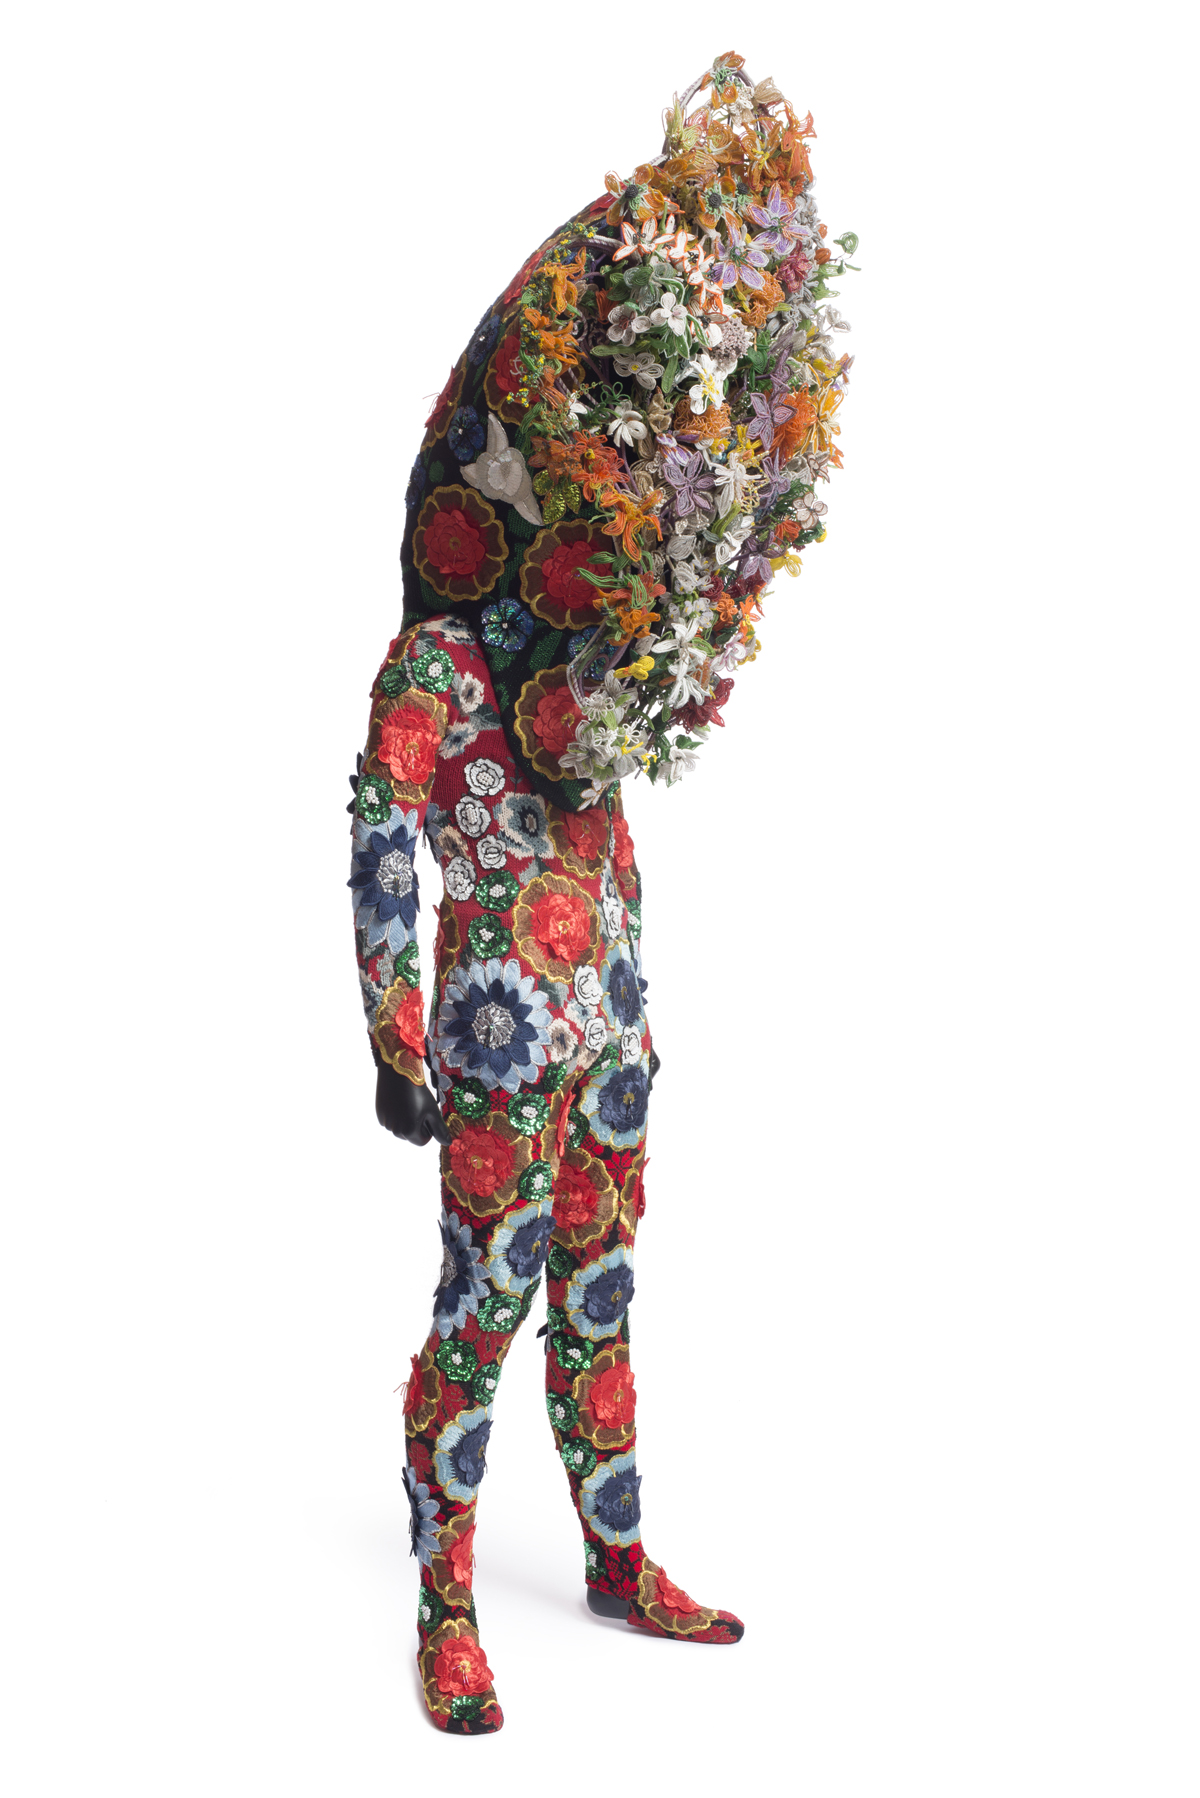 Soundsuit made of mixed media including sequins and beads, 2006-2012. (Courtesy of Nick Cave and Jack Shainman Gallery, New York. Photo by James Prinz Photography.)